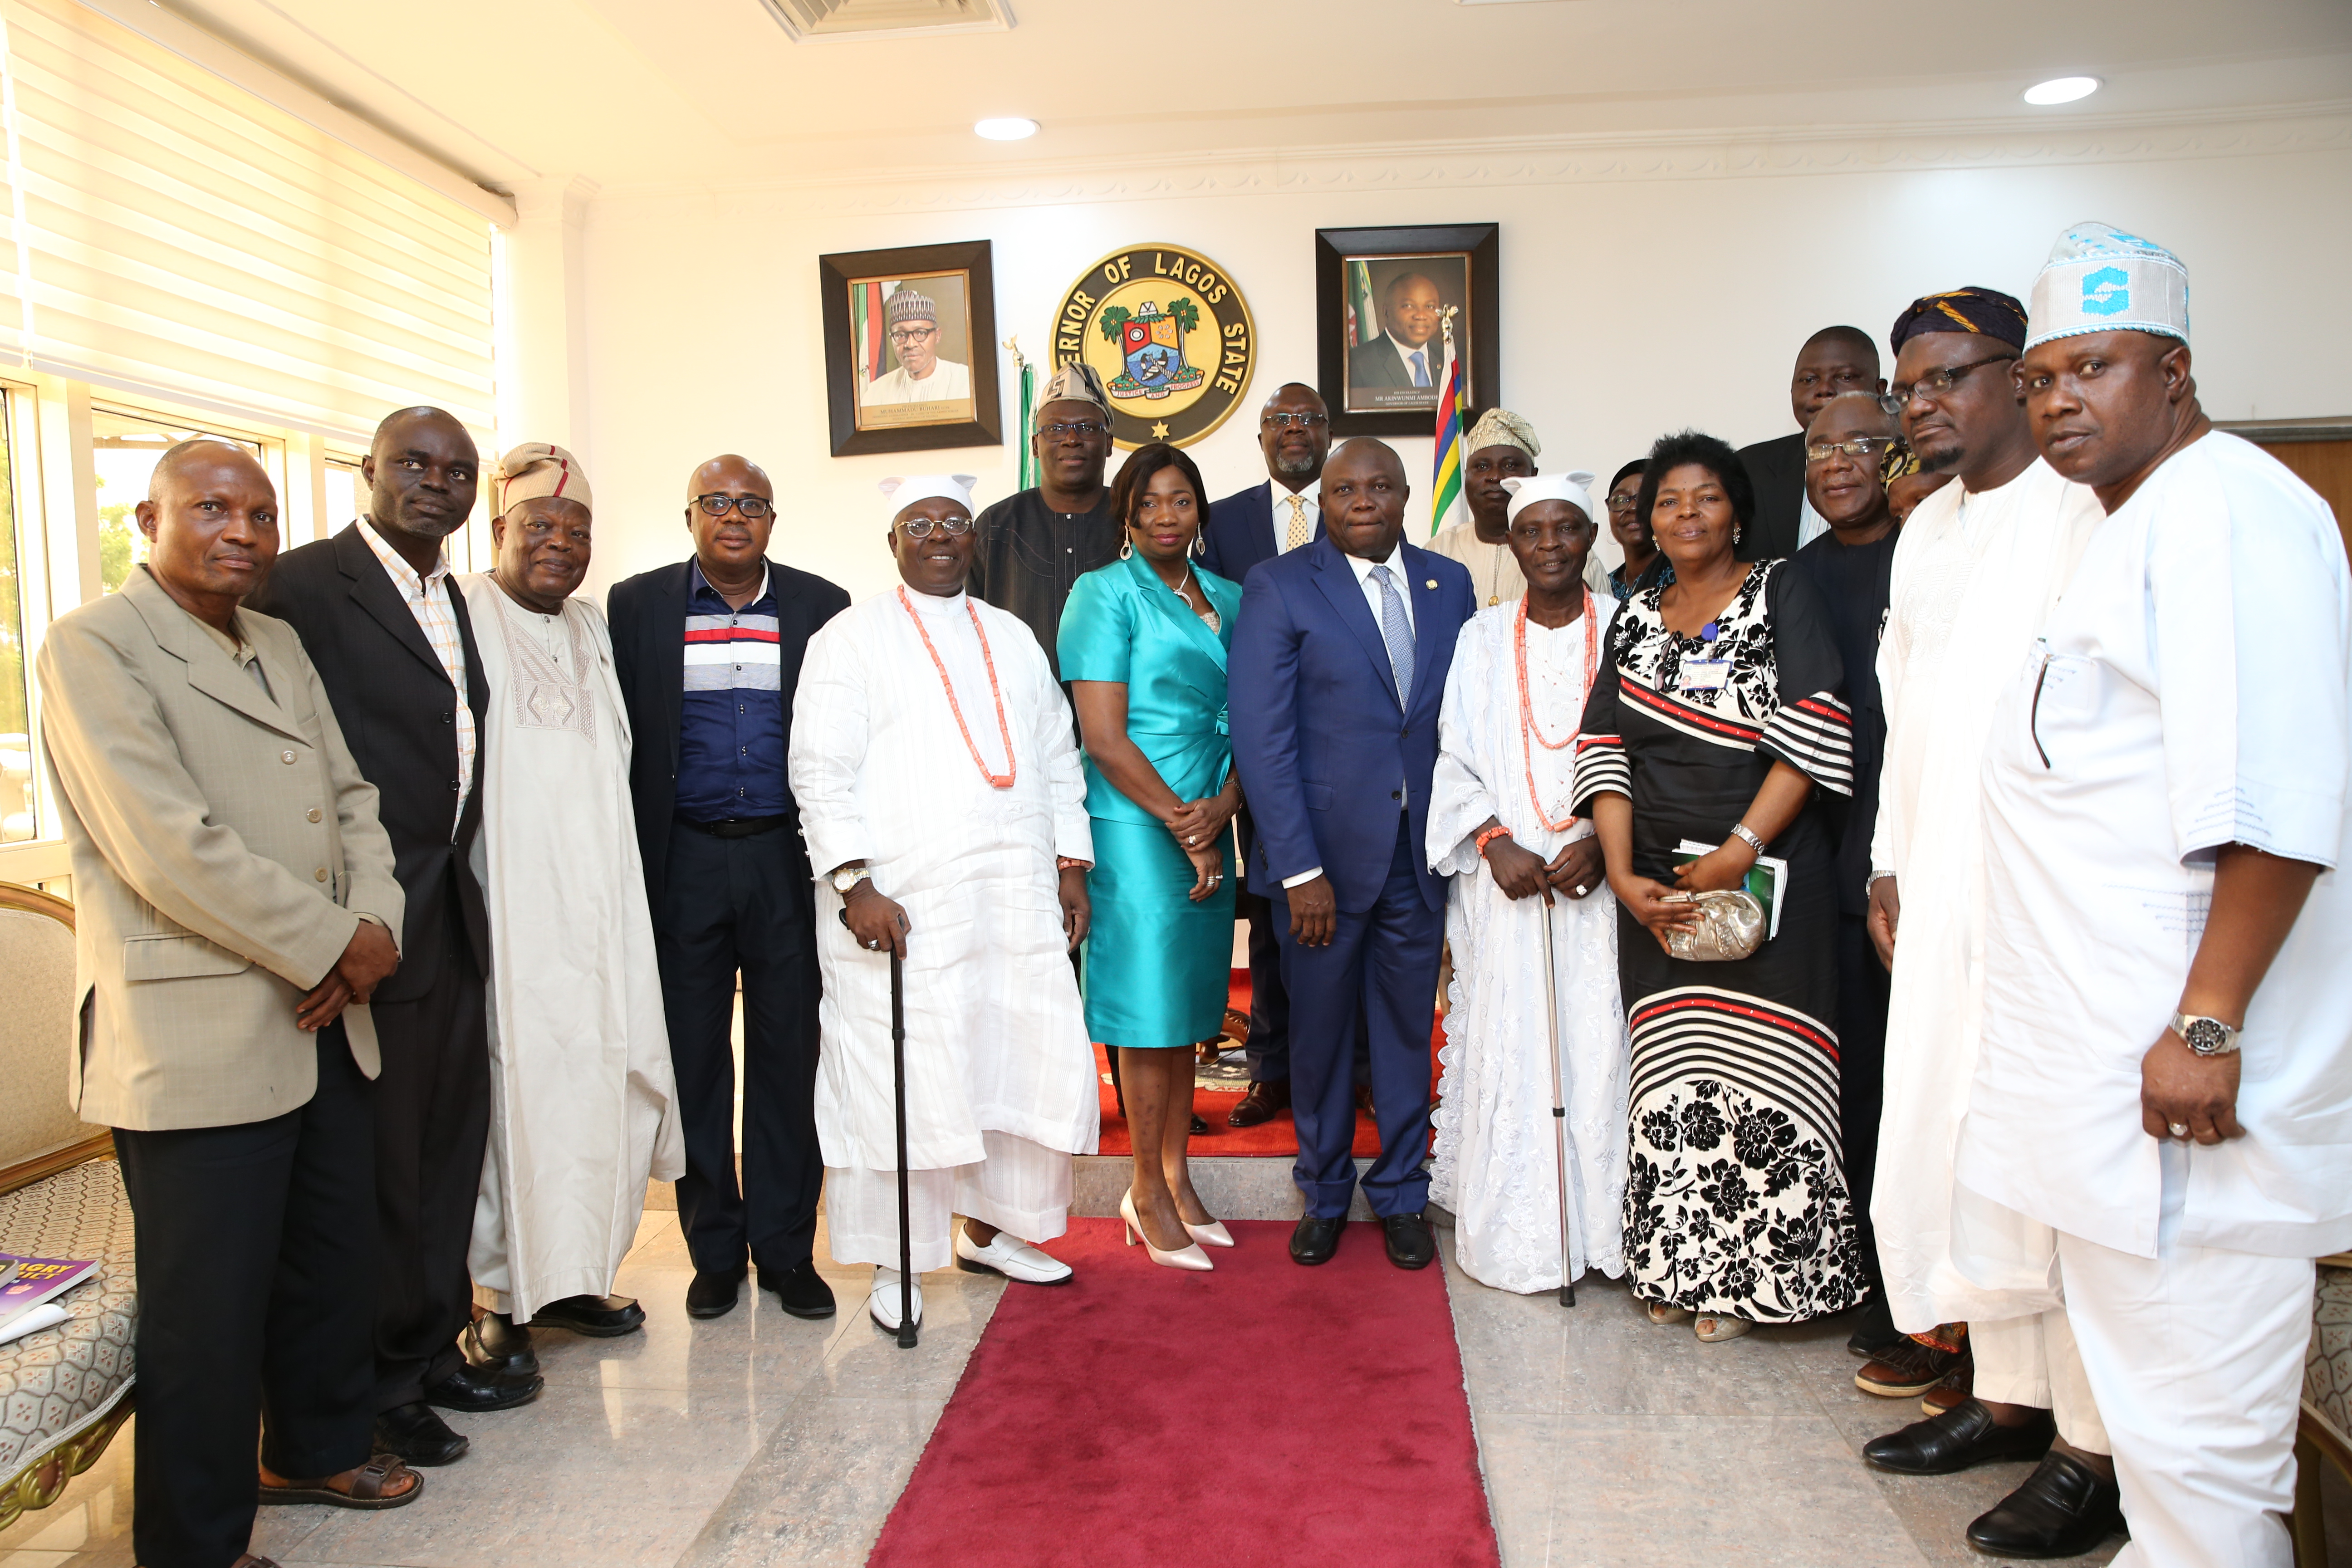 Lagos State Governor, Mr. Akinwunmi Ambode (middle), in a group photograph with the delegates of First Annual Diaspora Festival in Badagry and some members of the State Executive Council during the courtesy visit to the Governor by the delegates at the Lagos House, Ikeja, on Wednesday, May 3, 2017.